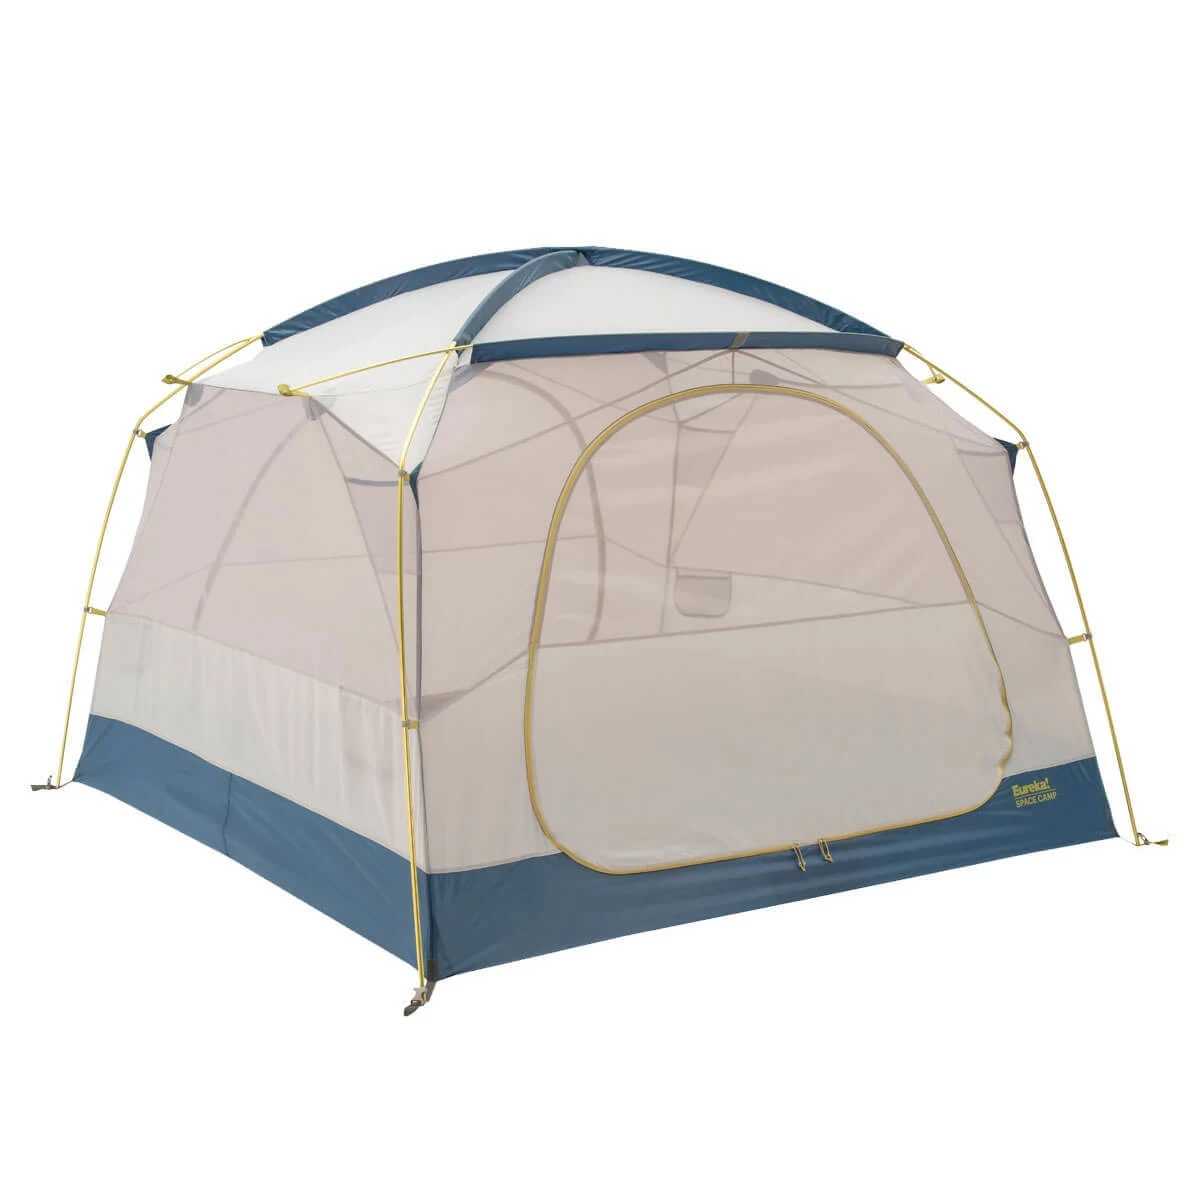 Space Camp 6 tent without rainfly